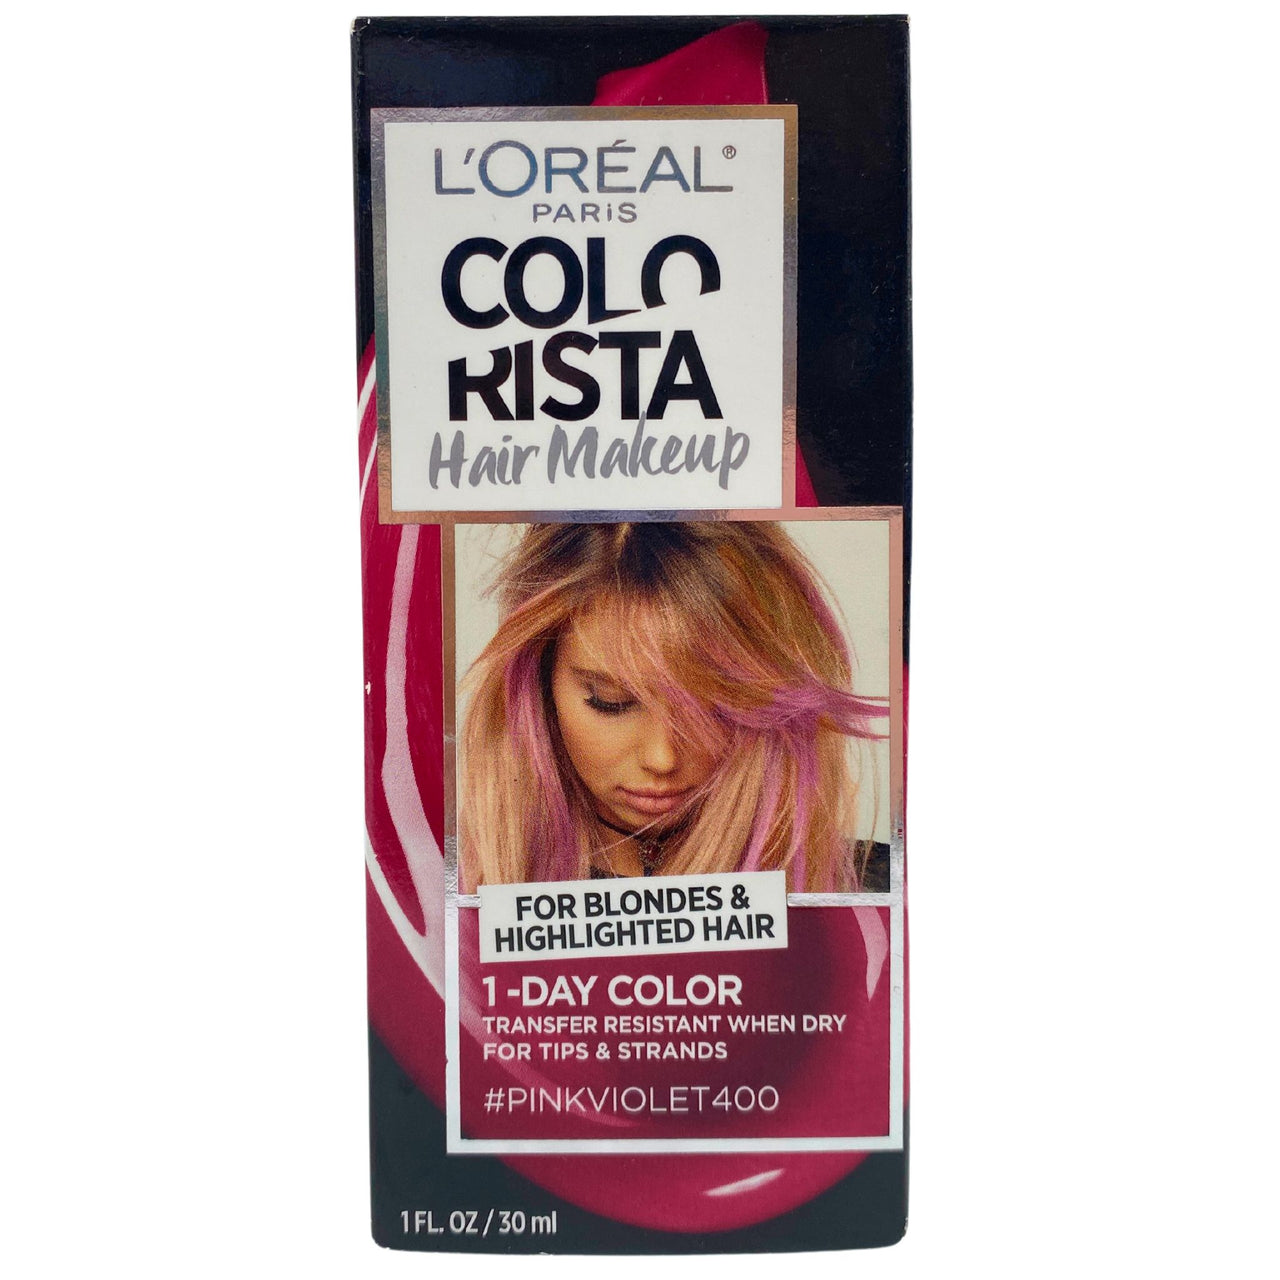 L'Oreal Paris Colorista Hair Makeup for Blondes & Highlighted Hair